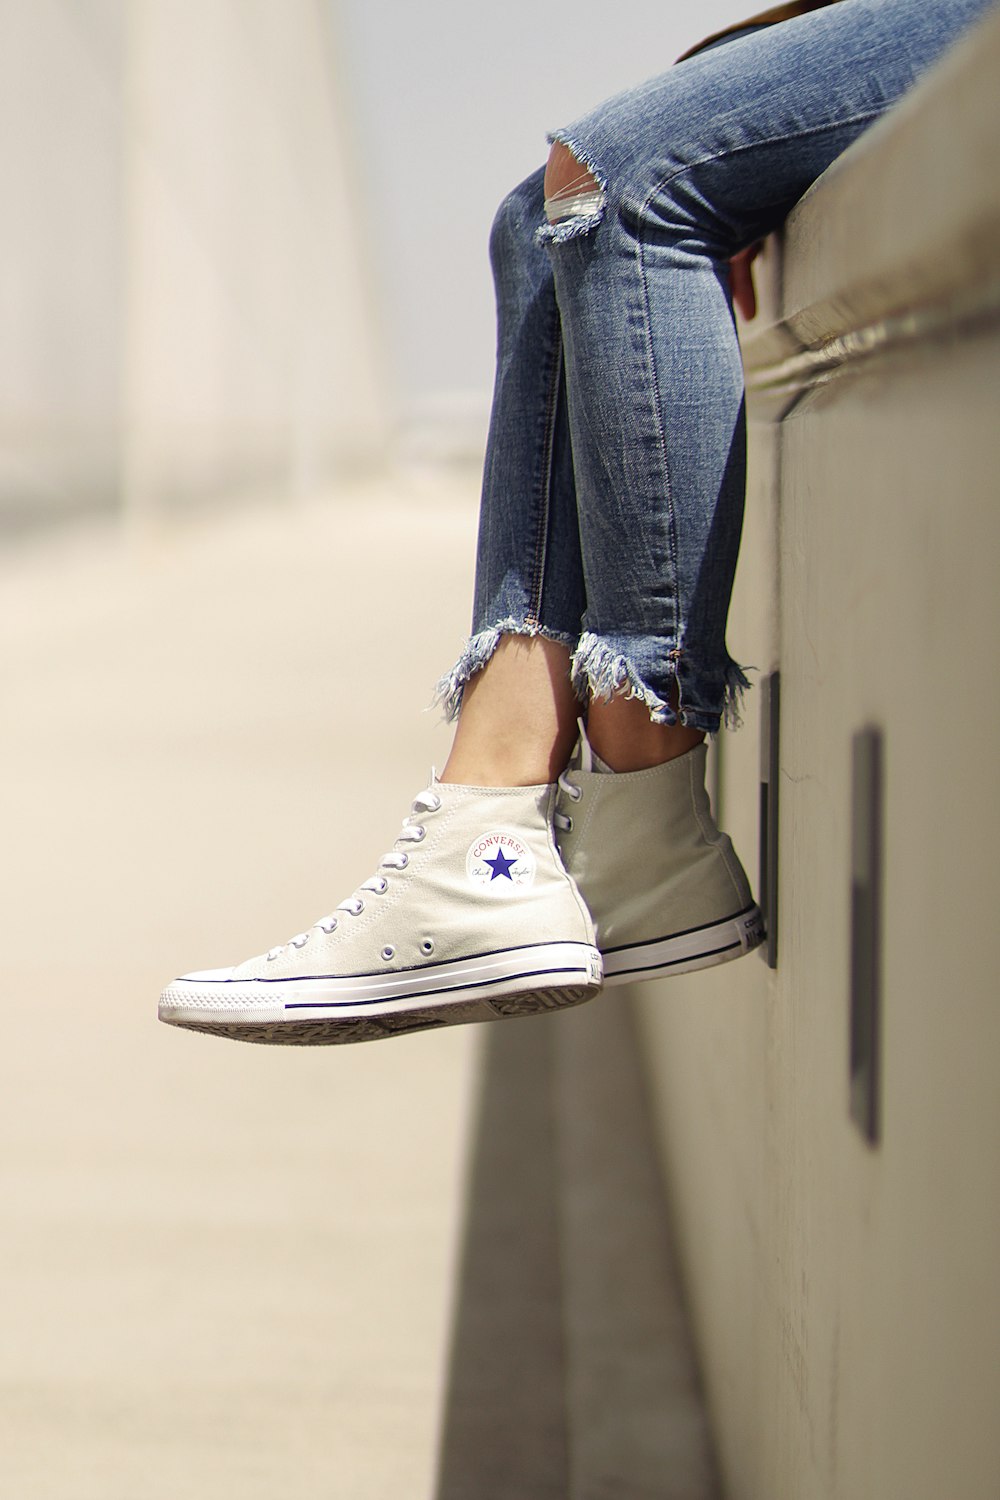 finansiere undersøgelse tørst Woman wearing white converse low-top sneakers photo – Free Fashion Image on  Unsplash